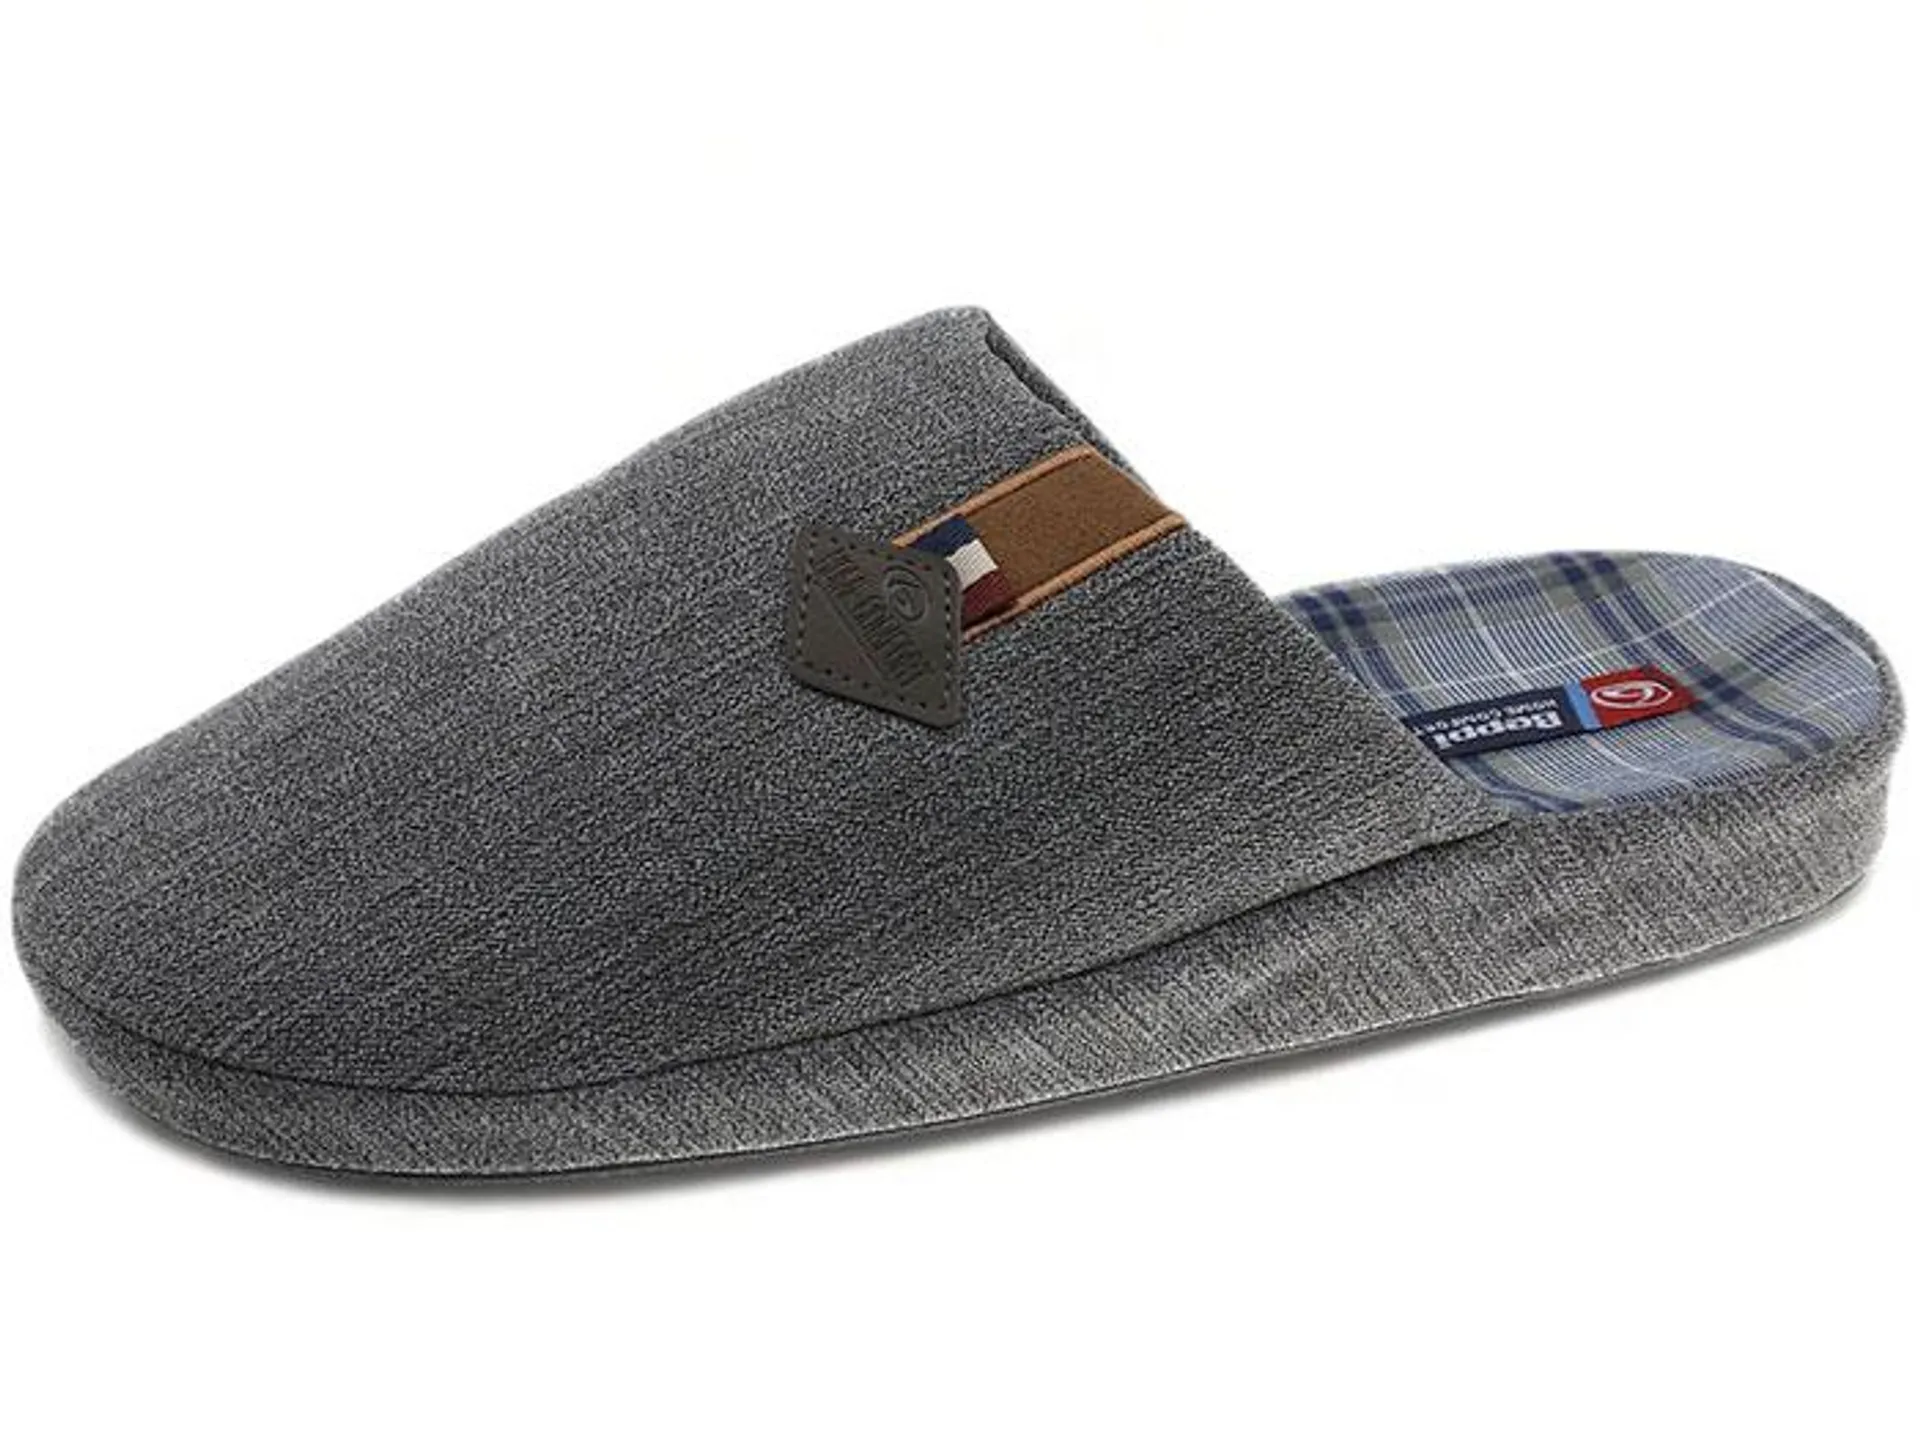 Indoor Slippers for man, warm and comfortable lining.